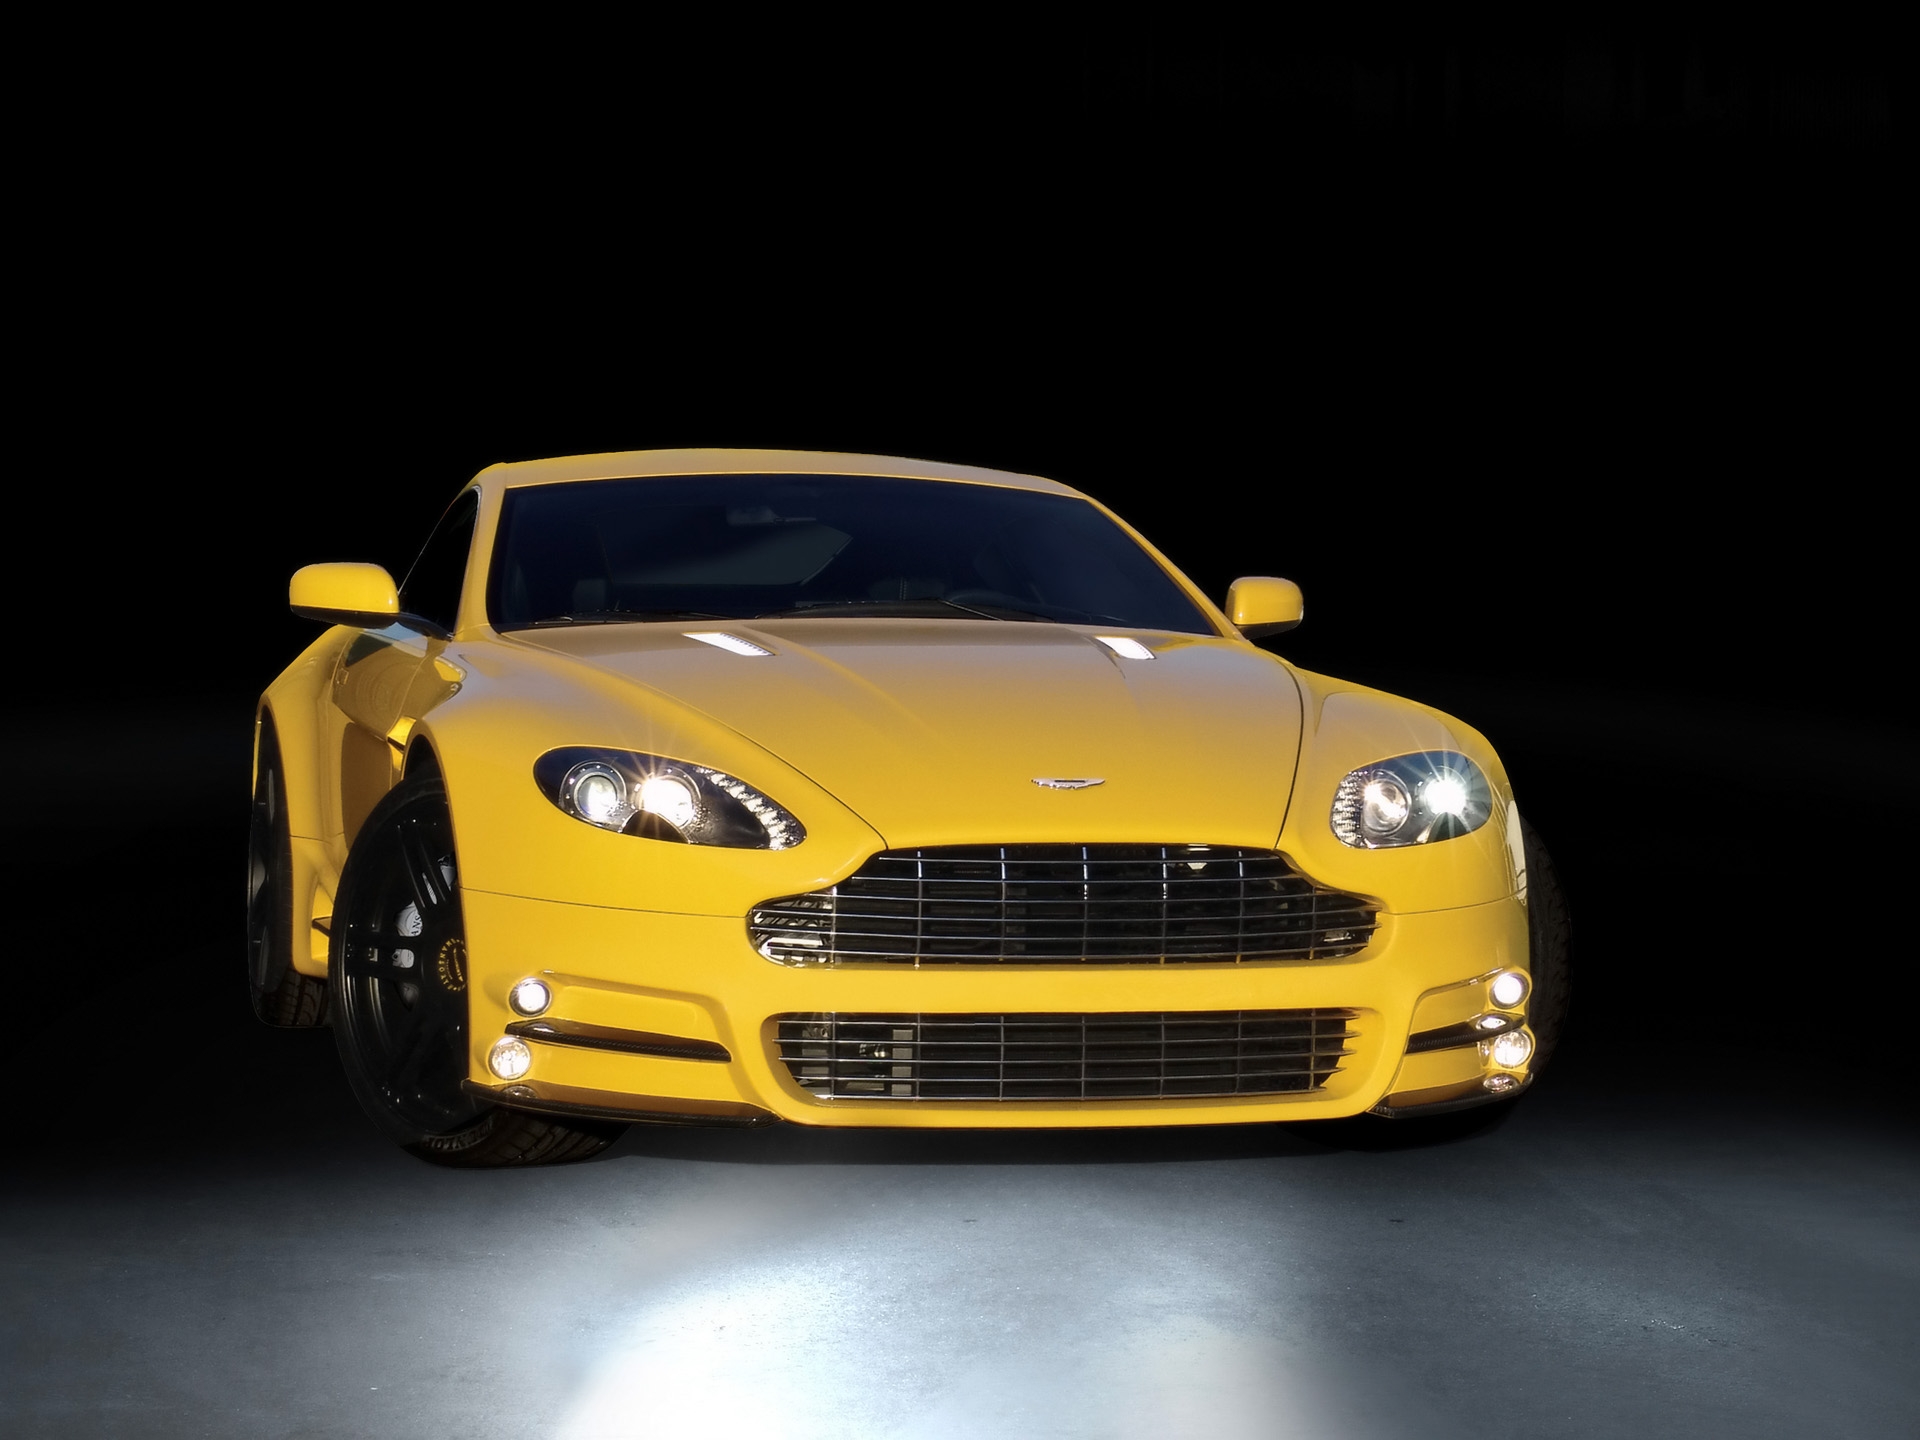 cars, sports, aston martin, yellow, front view, style, v8, vantage, mansory Full HD